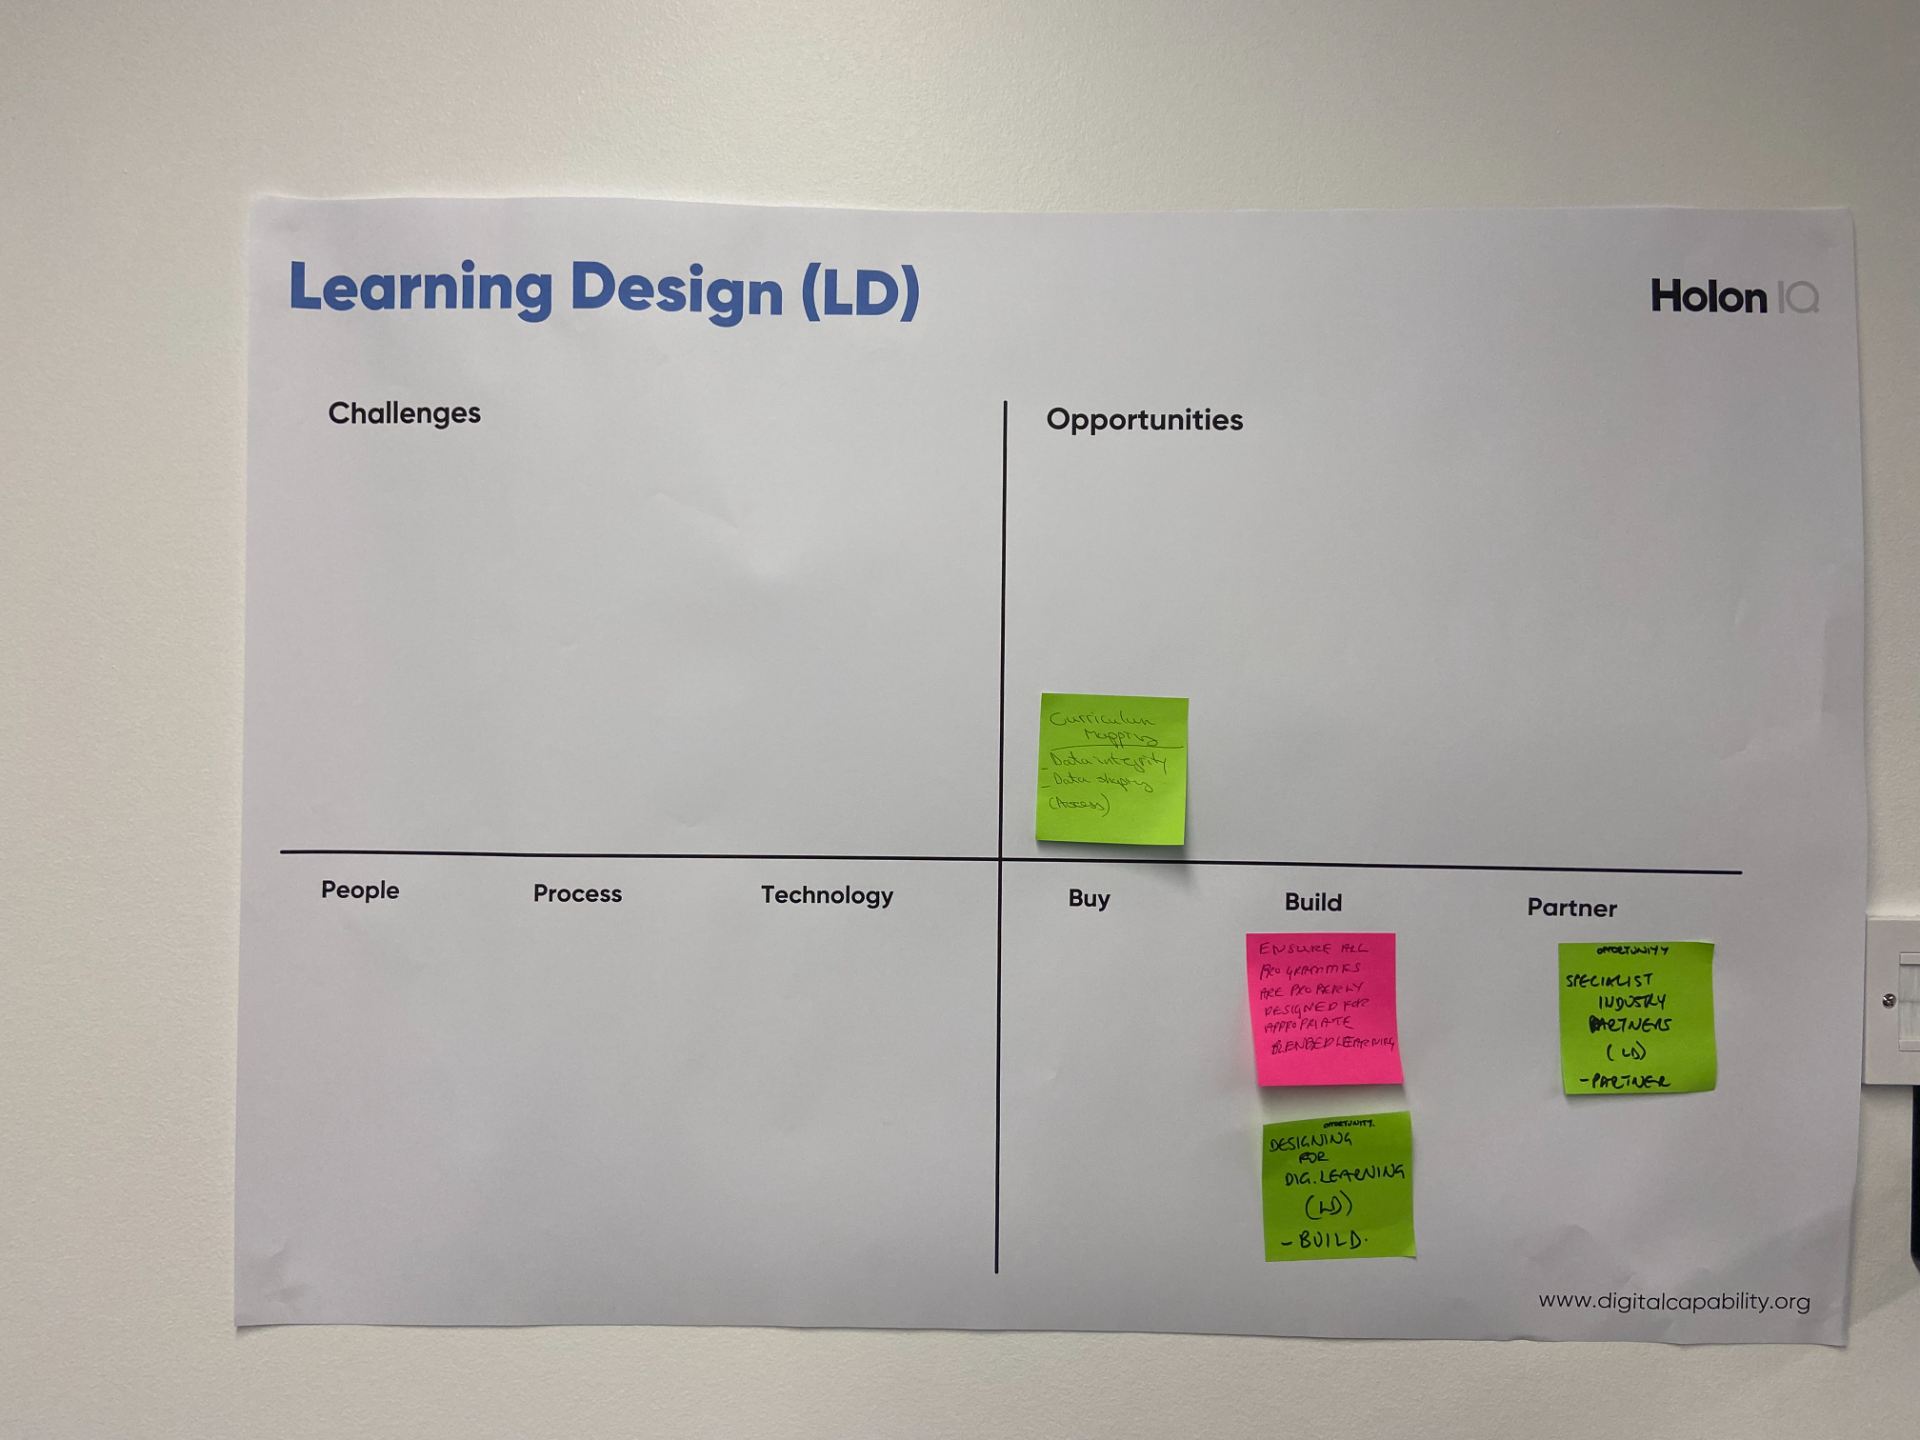 Learning Design (LD) poster dividing the page into four quadrants. Top left: challenges. Bottom left: "People, Process, Technology". Top right: opportunities. Bottom right: 'Buy, Build, Partner'. Post-it notes appear in the top right and bottom right quadrants.